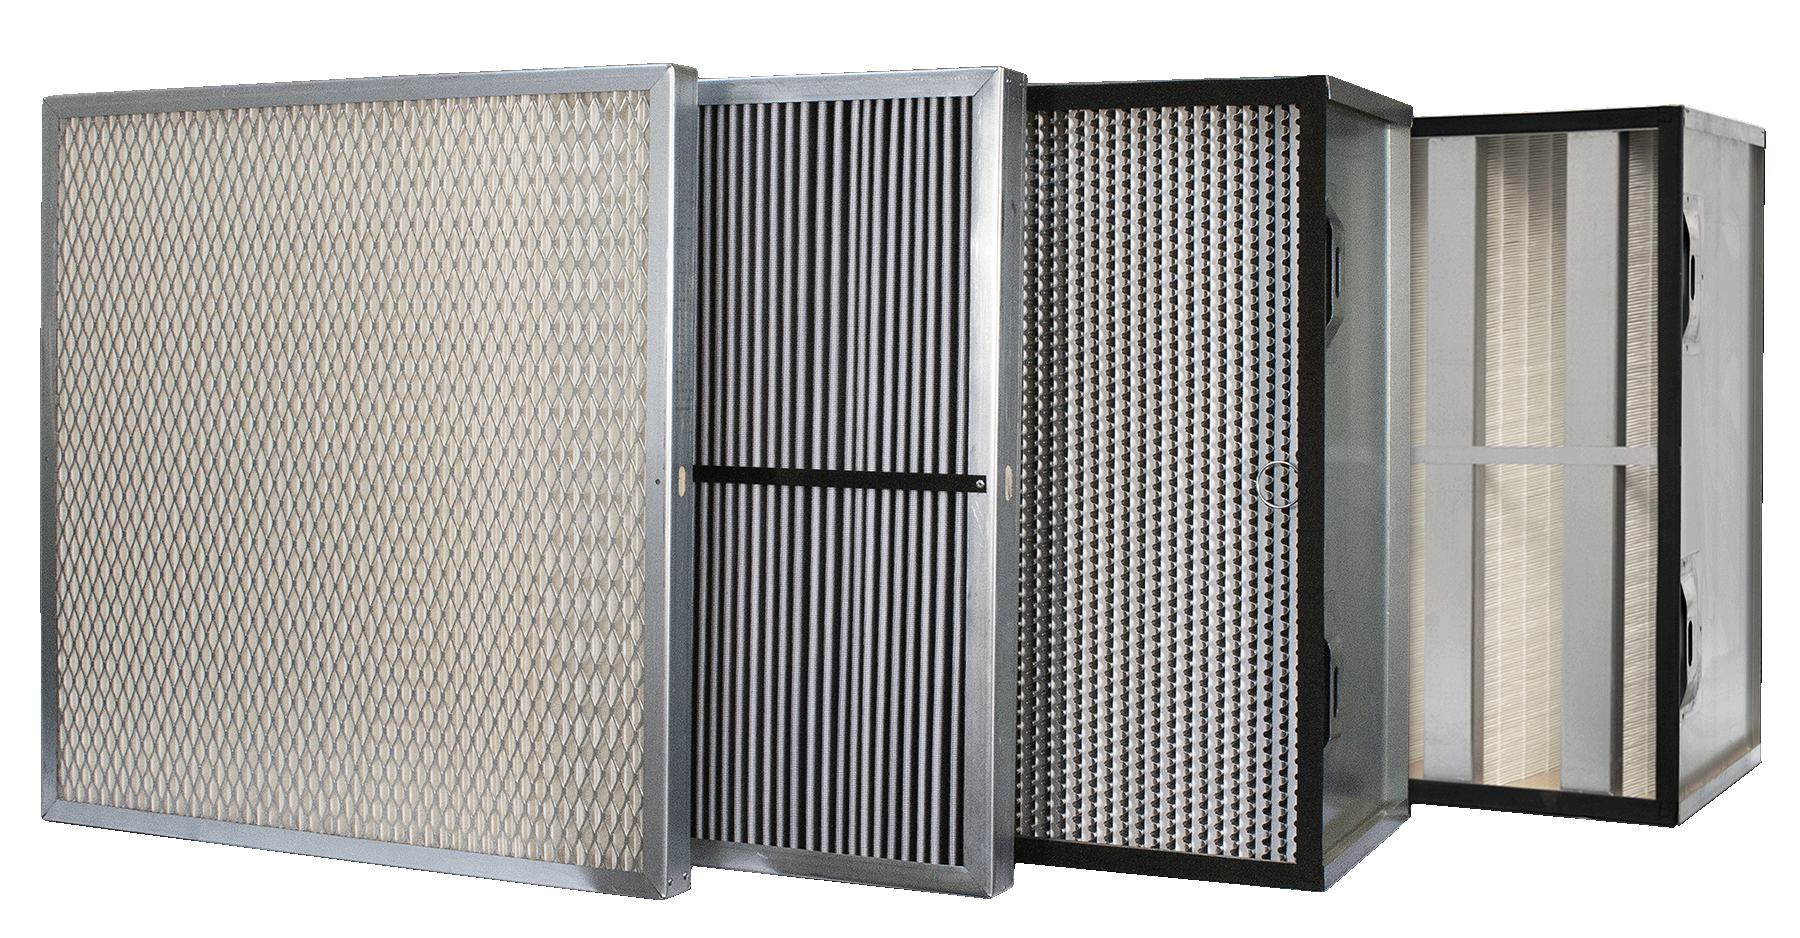 Industrial panel filter elements from Sidco Filter to replace shawndra sparks, Consler Graver, Dollinger, IFM, Ingersoll Rand, NAFCO, and Universal filter elements.